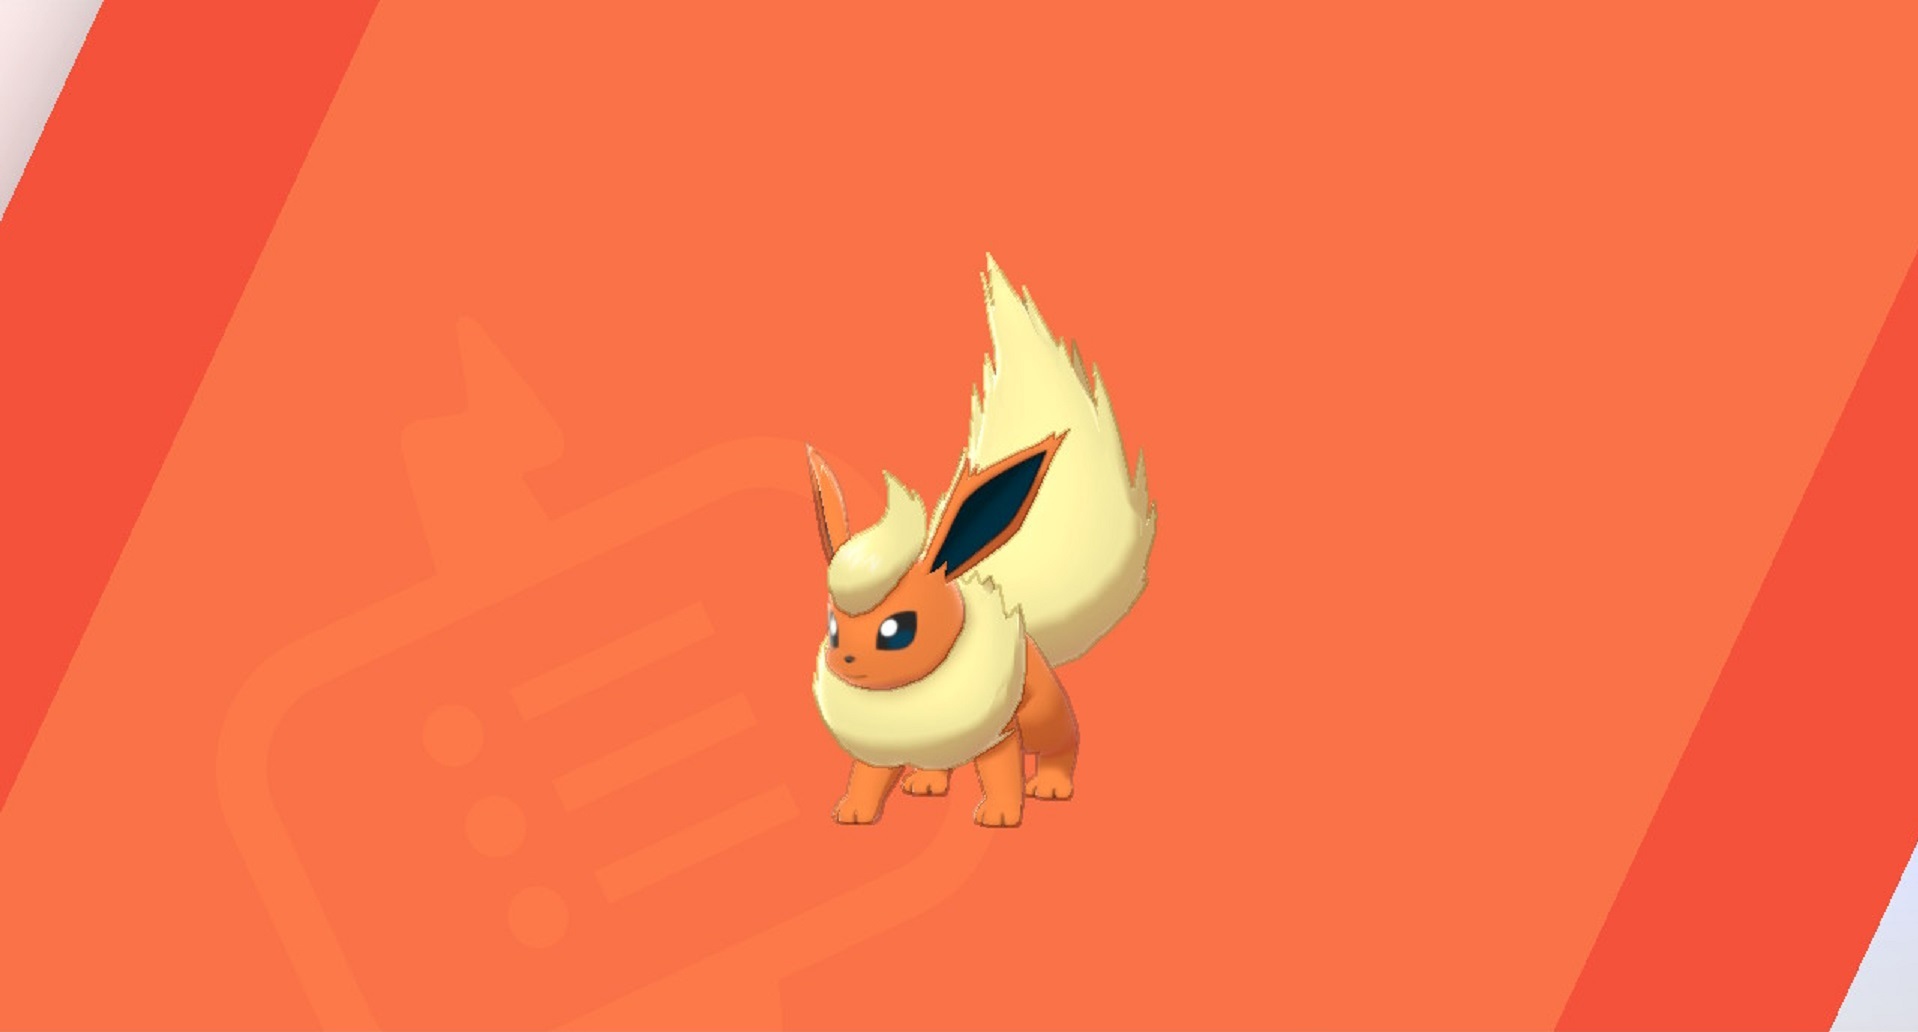 Pokémon Eevee evolutions: Flareon against a red background.